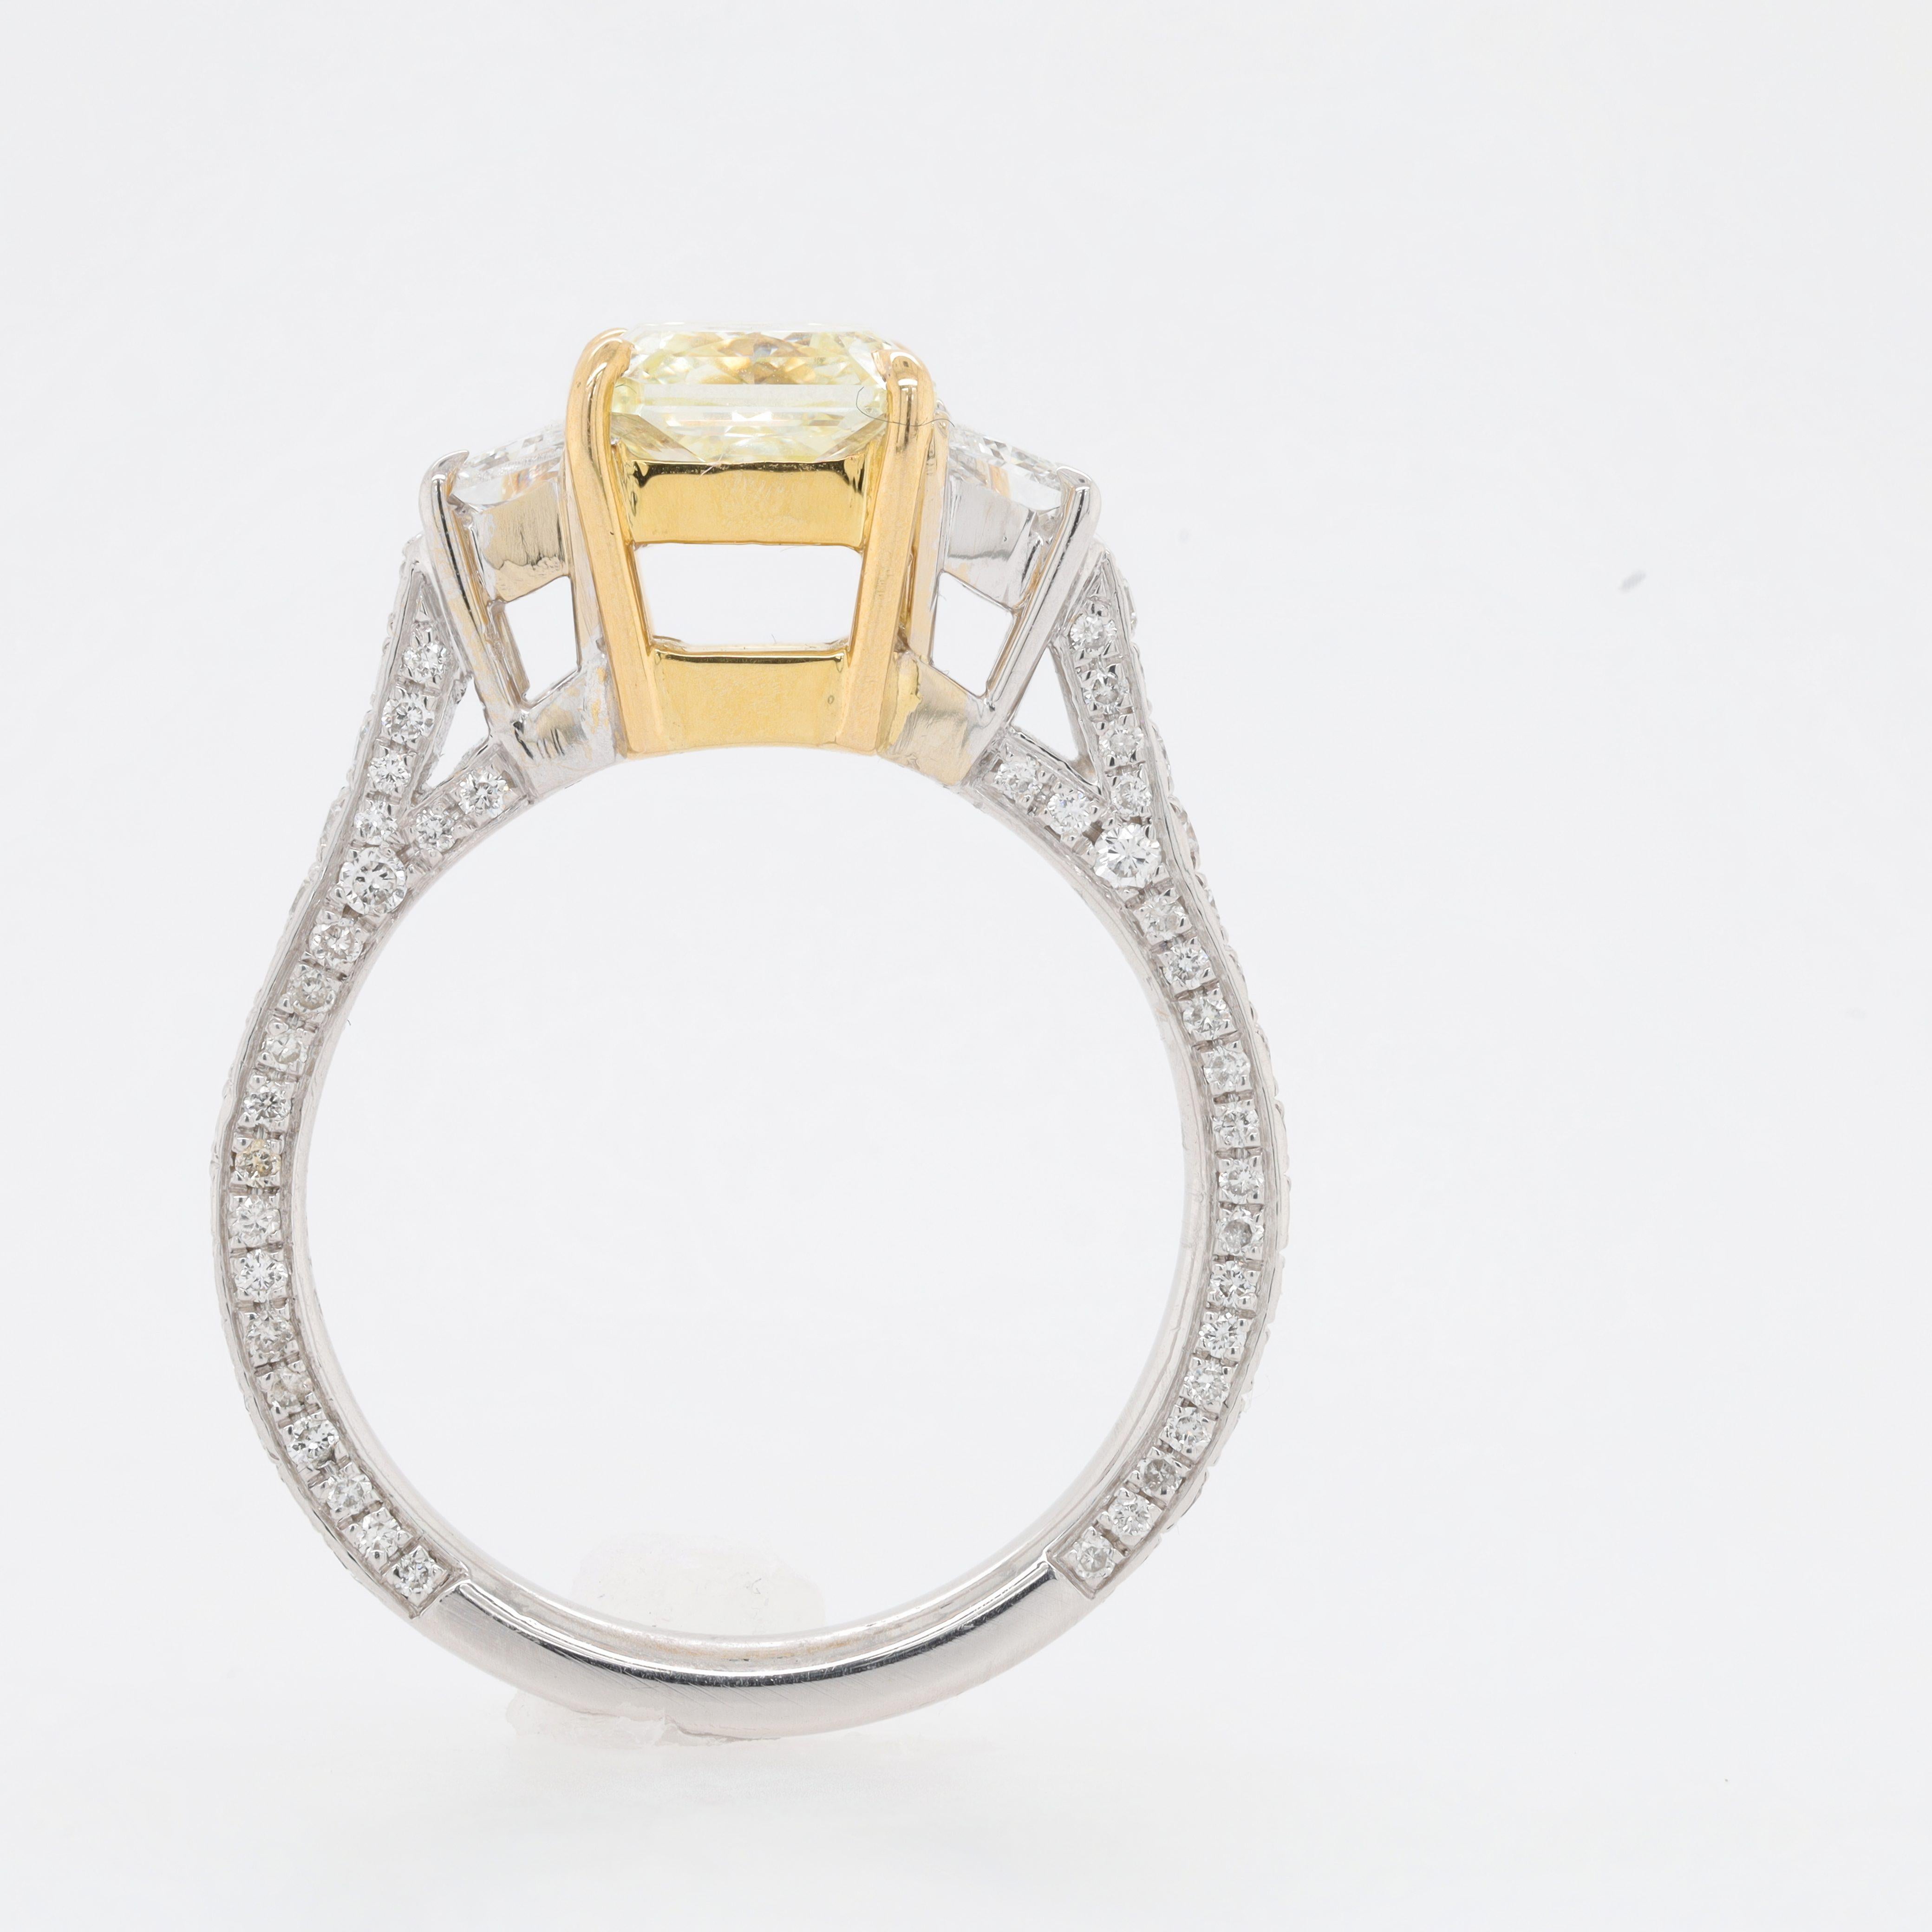 Platinum and 18 kt yellow gold engagement ring featuring a center (FY VVS2) 1.78 ct radiant cut diamond with 2 trapezoid shaped diamonds on the sides and round diamonds going around the band totaling 1.15 cts